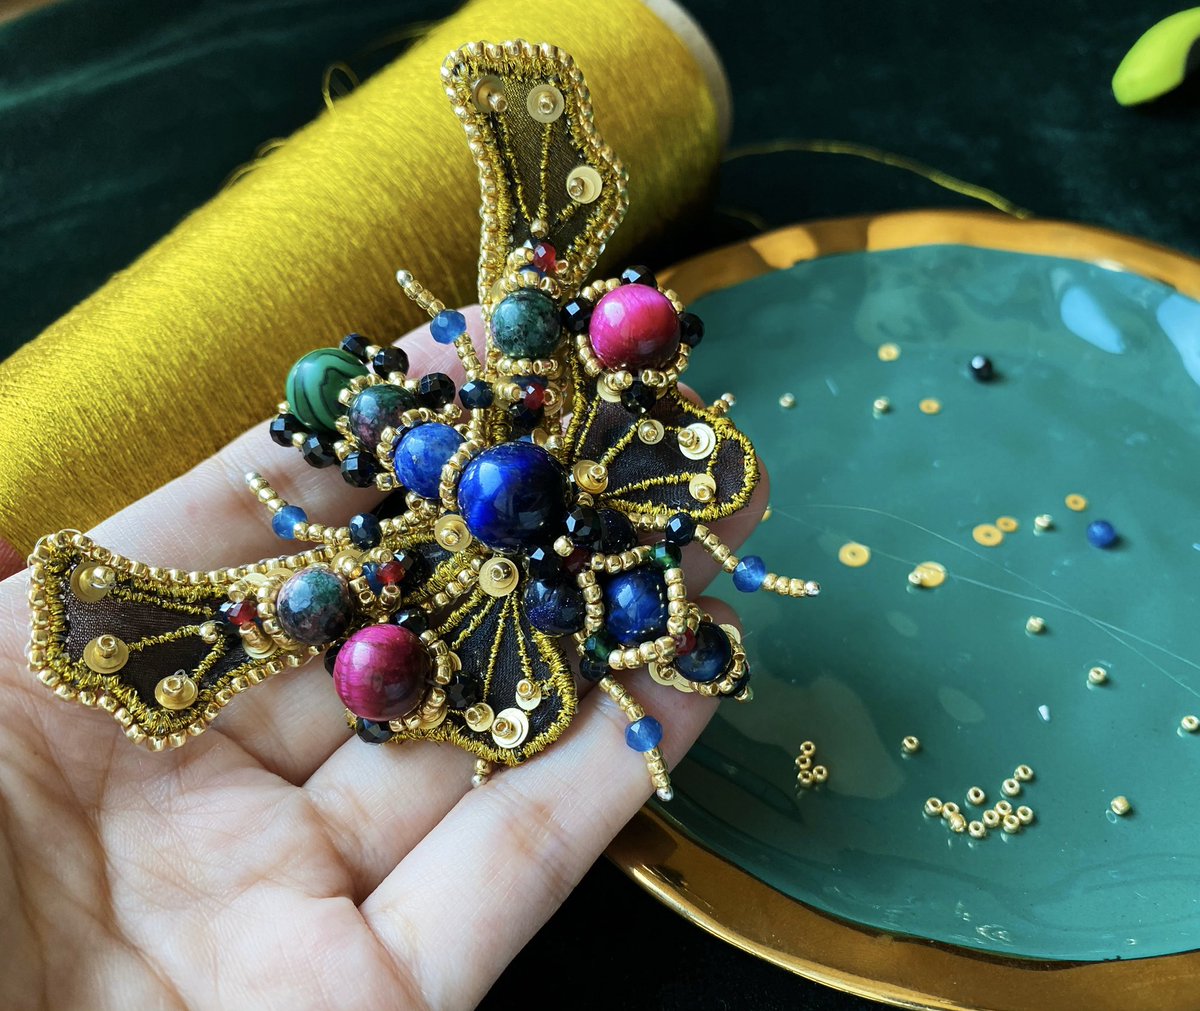 #handcrafted #embroideryjewelry #flybrooch  #handmadejewelry  
Inspired by the beautiful fly, I designed this brooch. The wings are made by embroidery techniques with fine silk, a lot of gemstones are used to finish this jewelry piece.